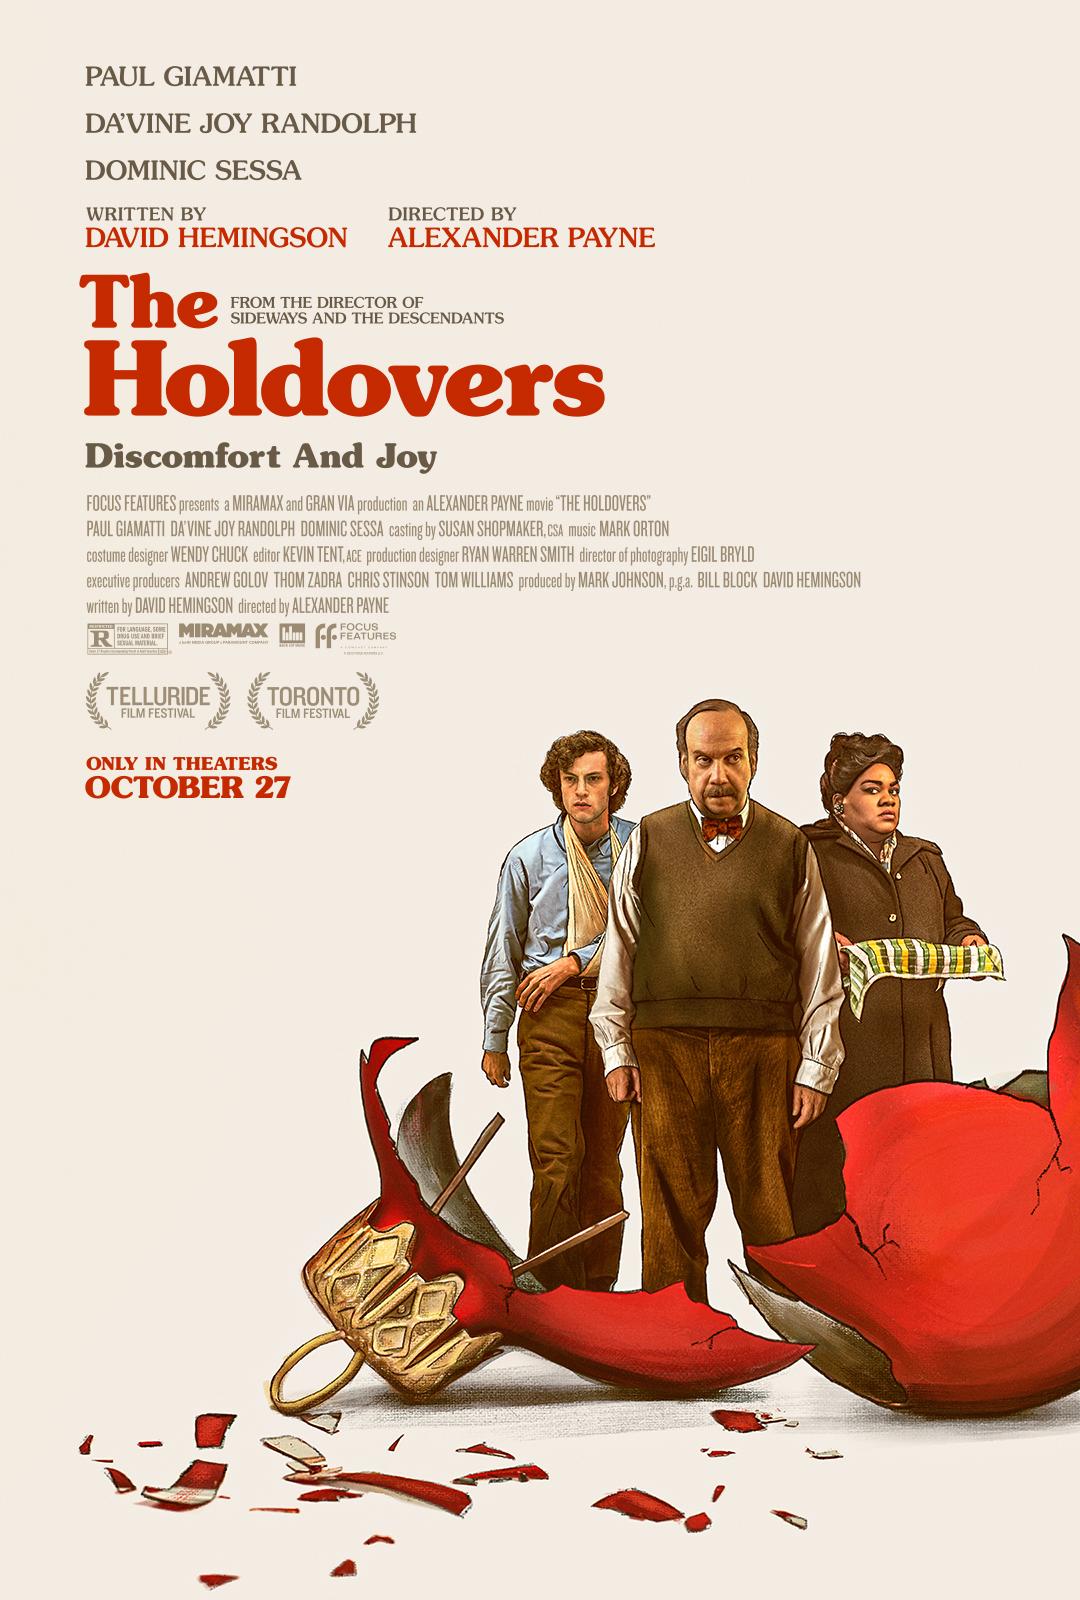 1. The Holdovers 9.5/10